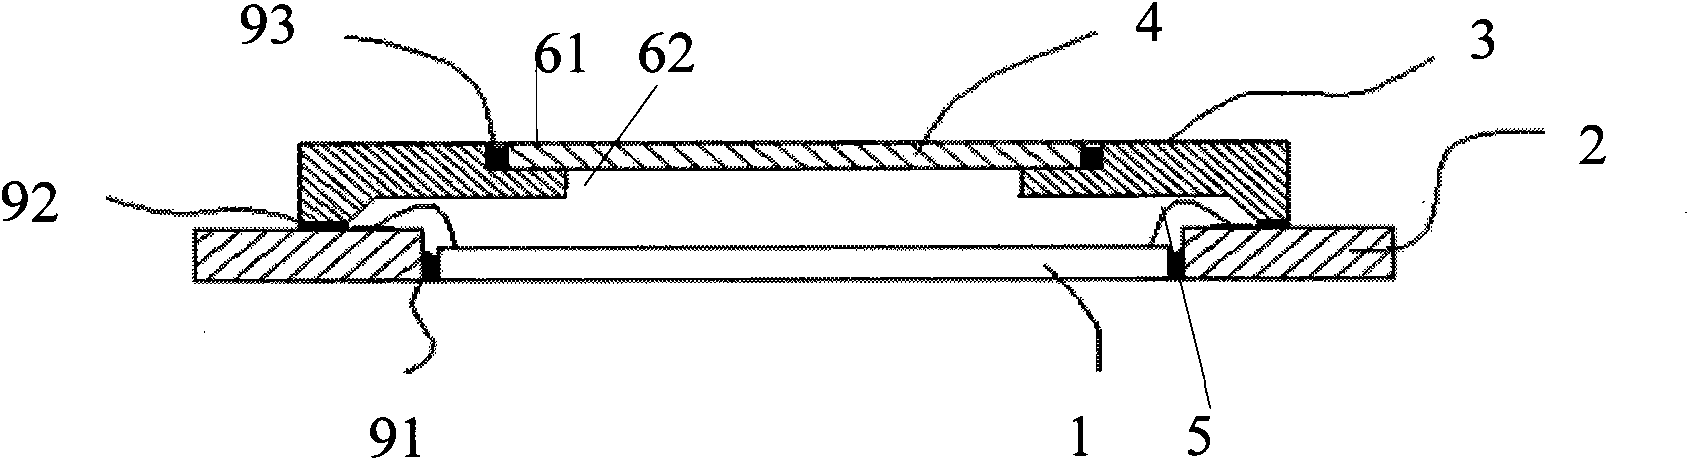 Ultrathin packaging structure and packaging method of image sensing chip